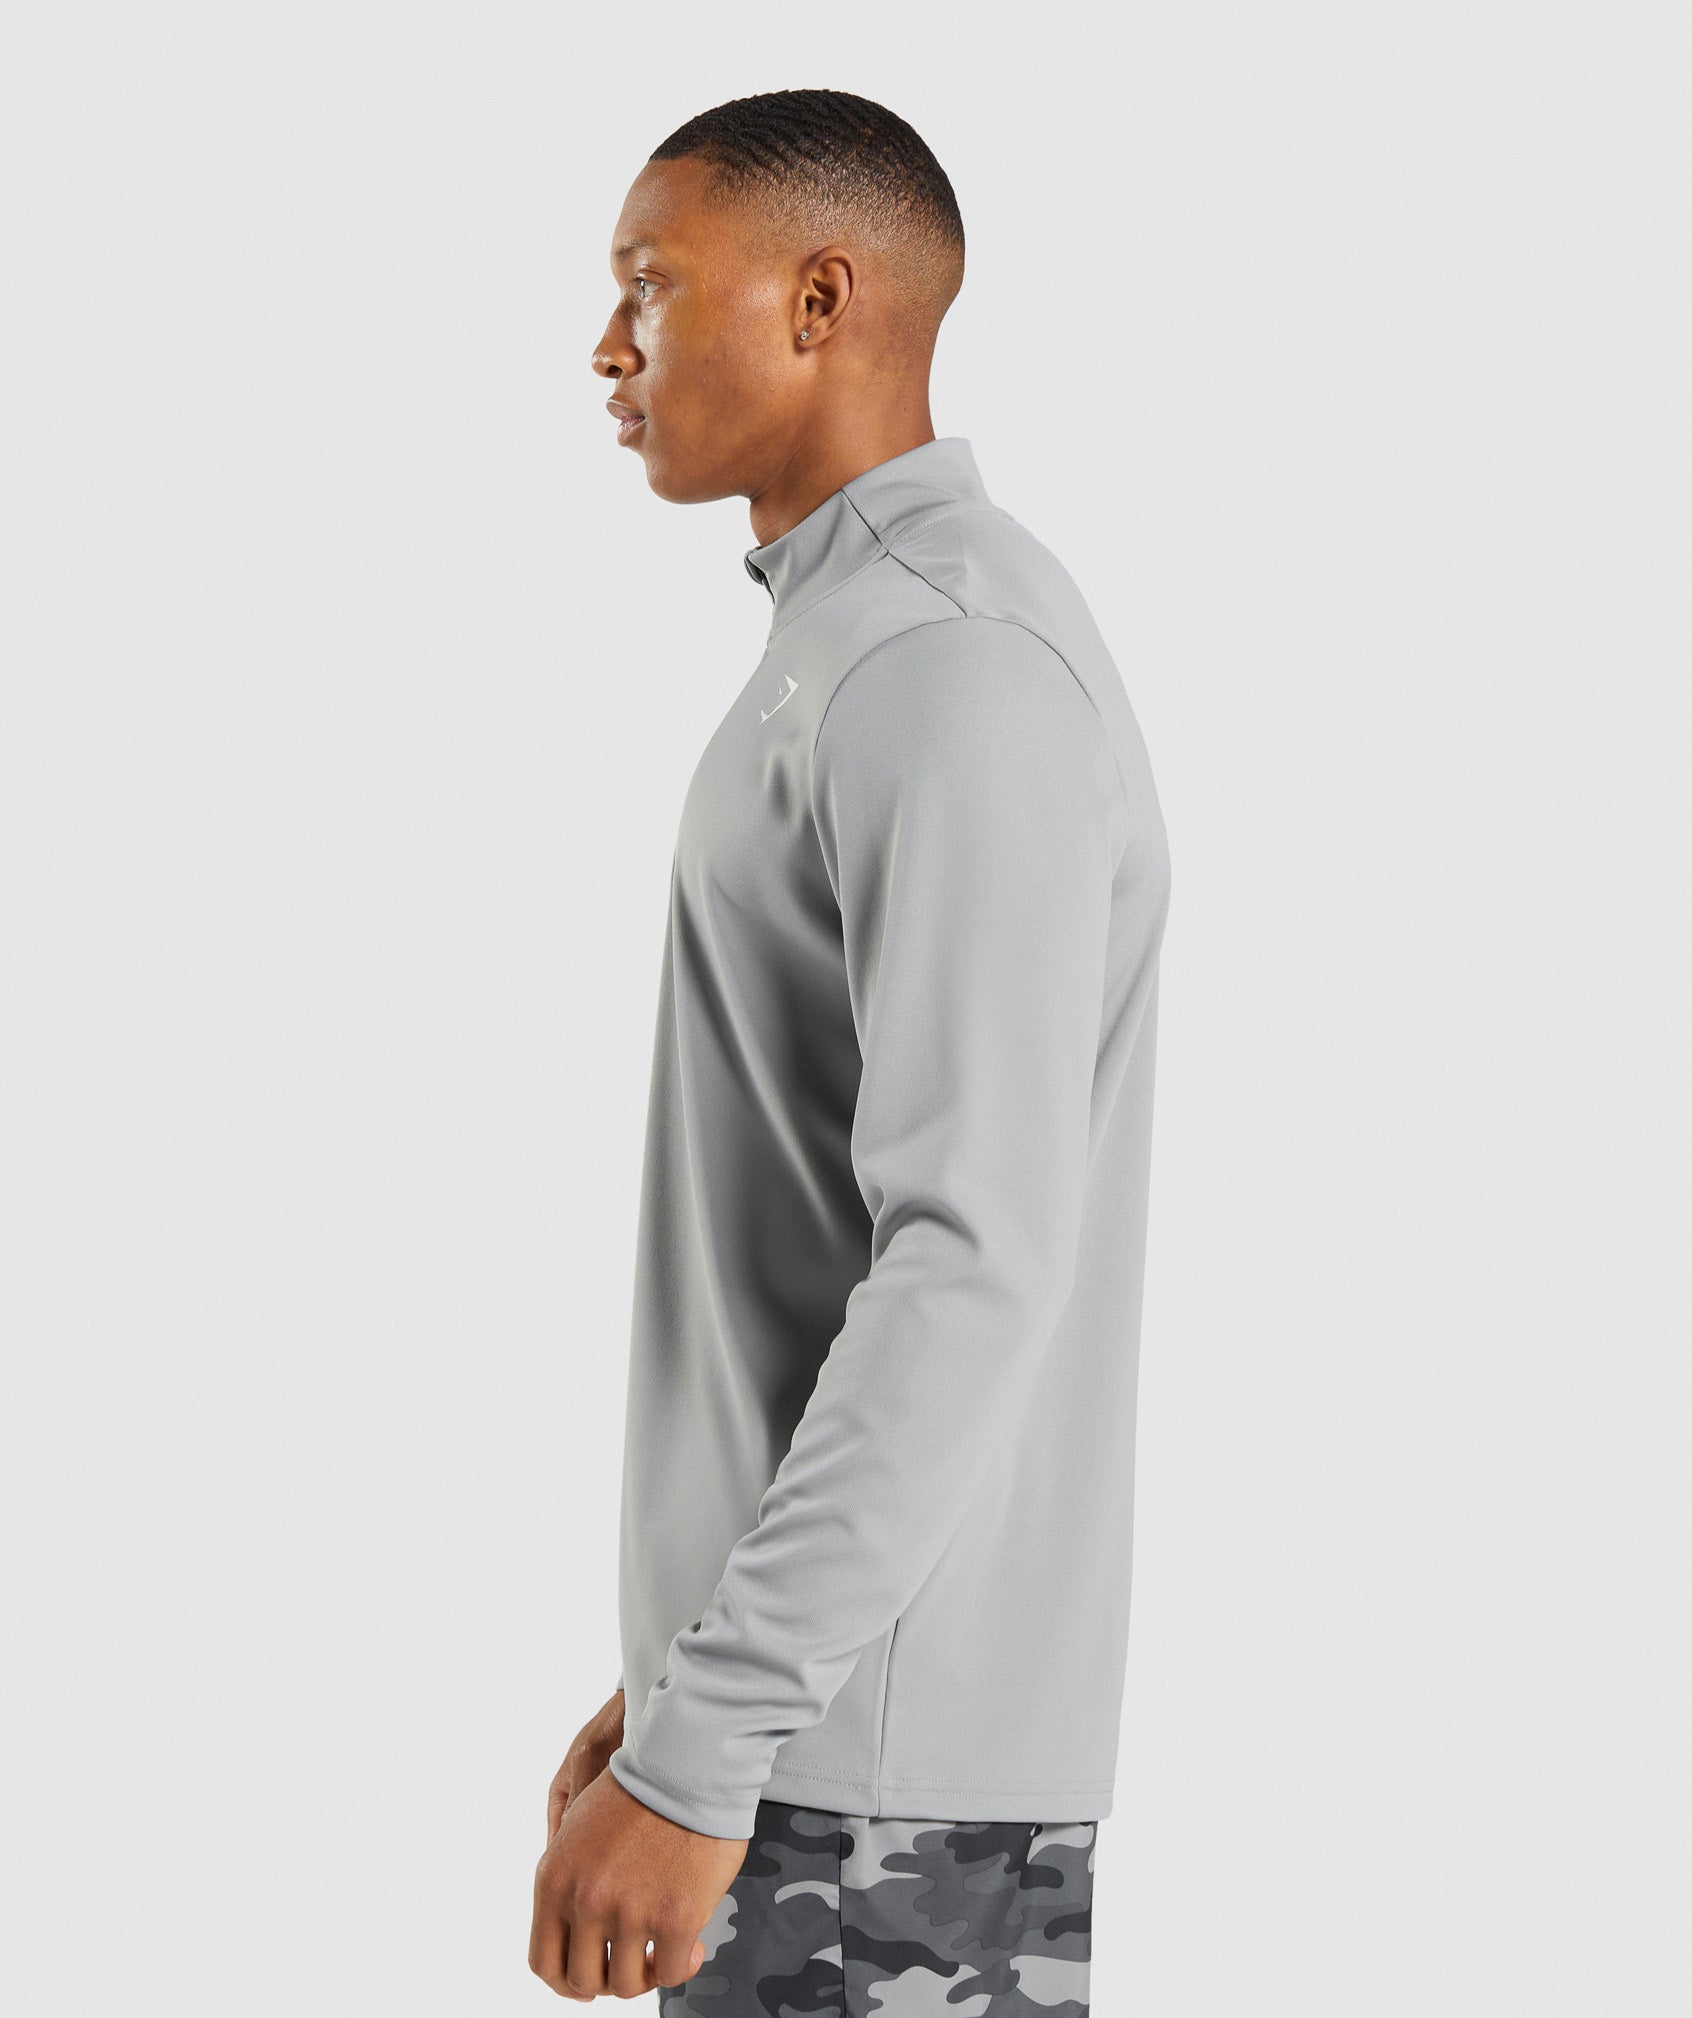 Arrival 1/4 Zip Pullover in Smokey Grey - view 4